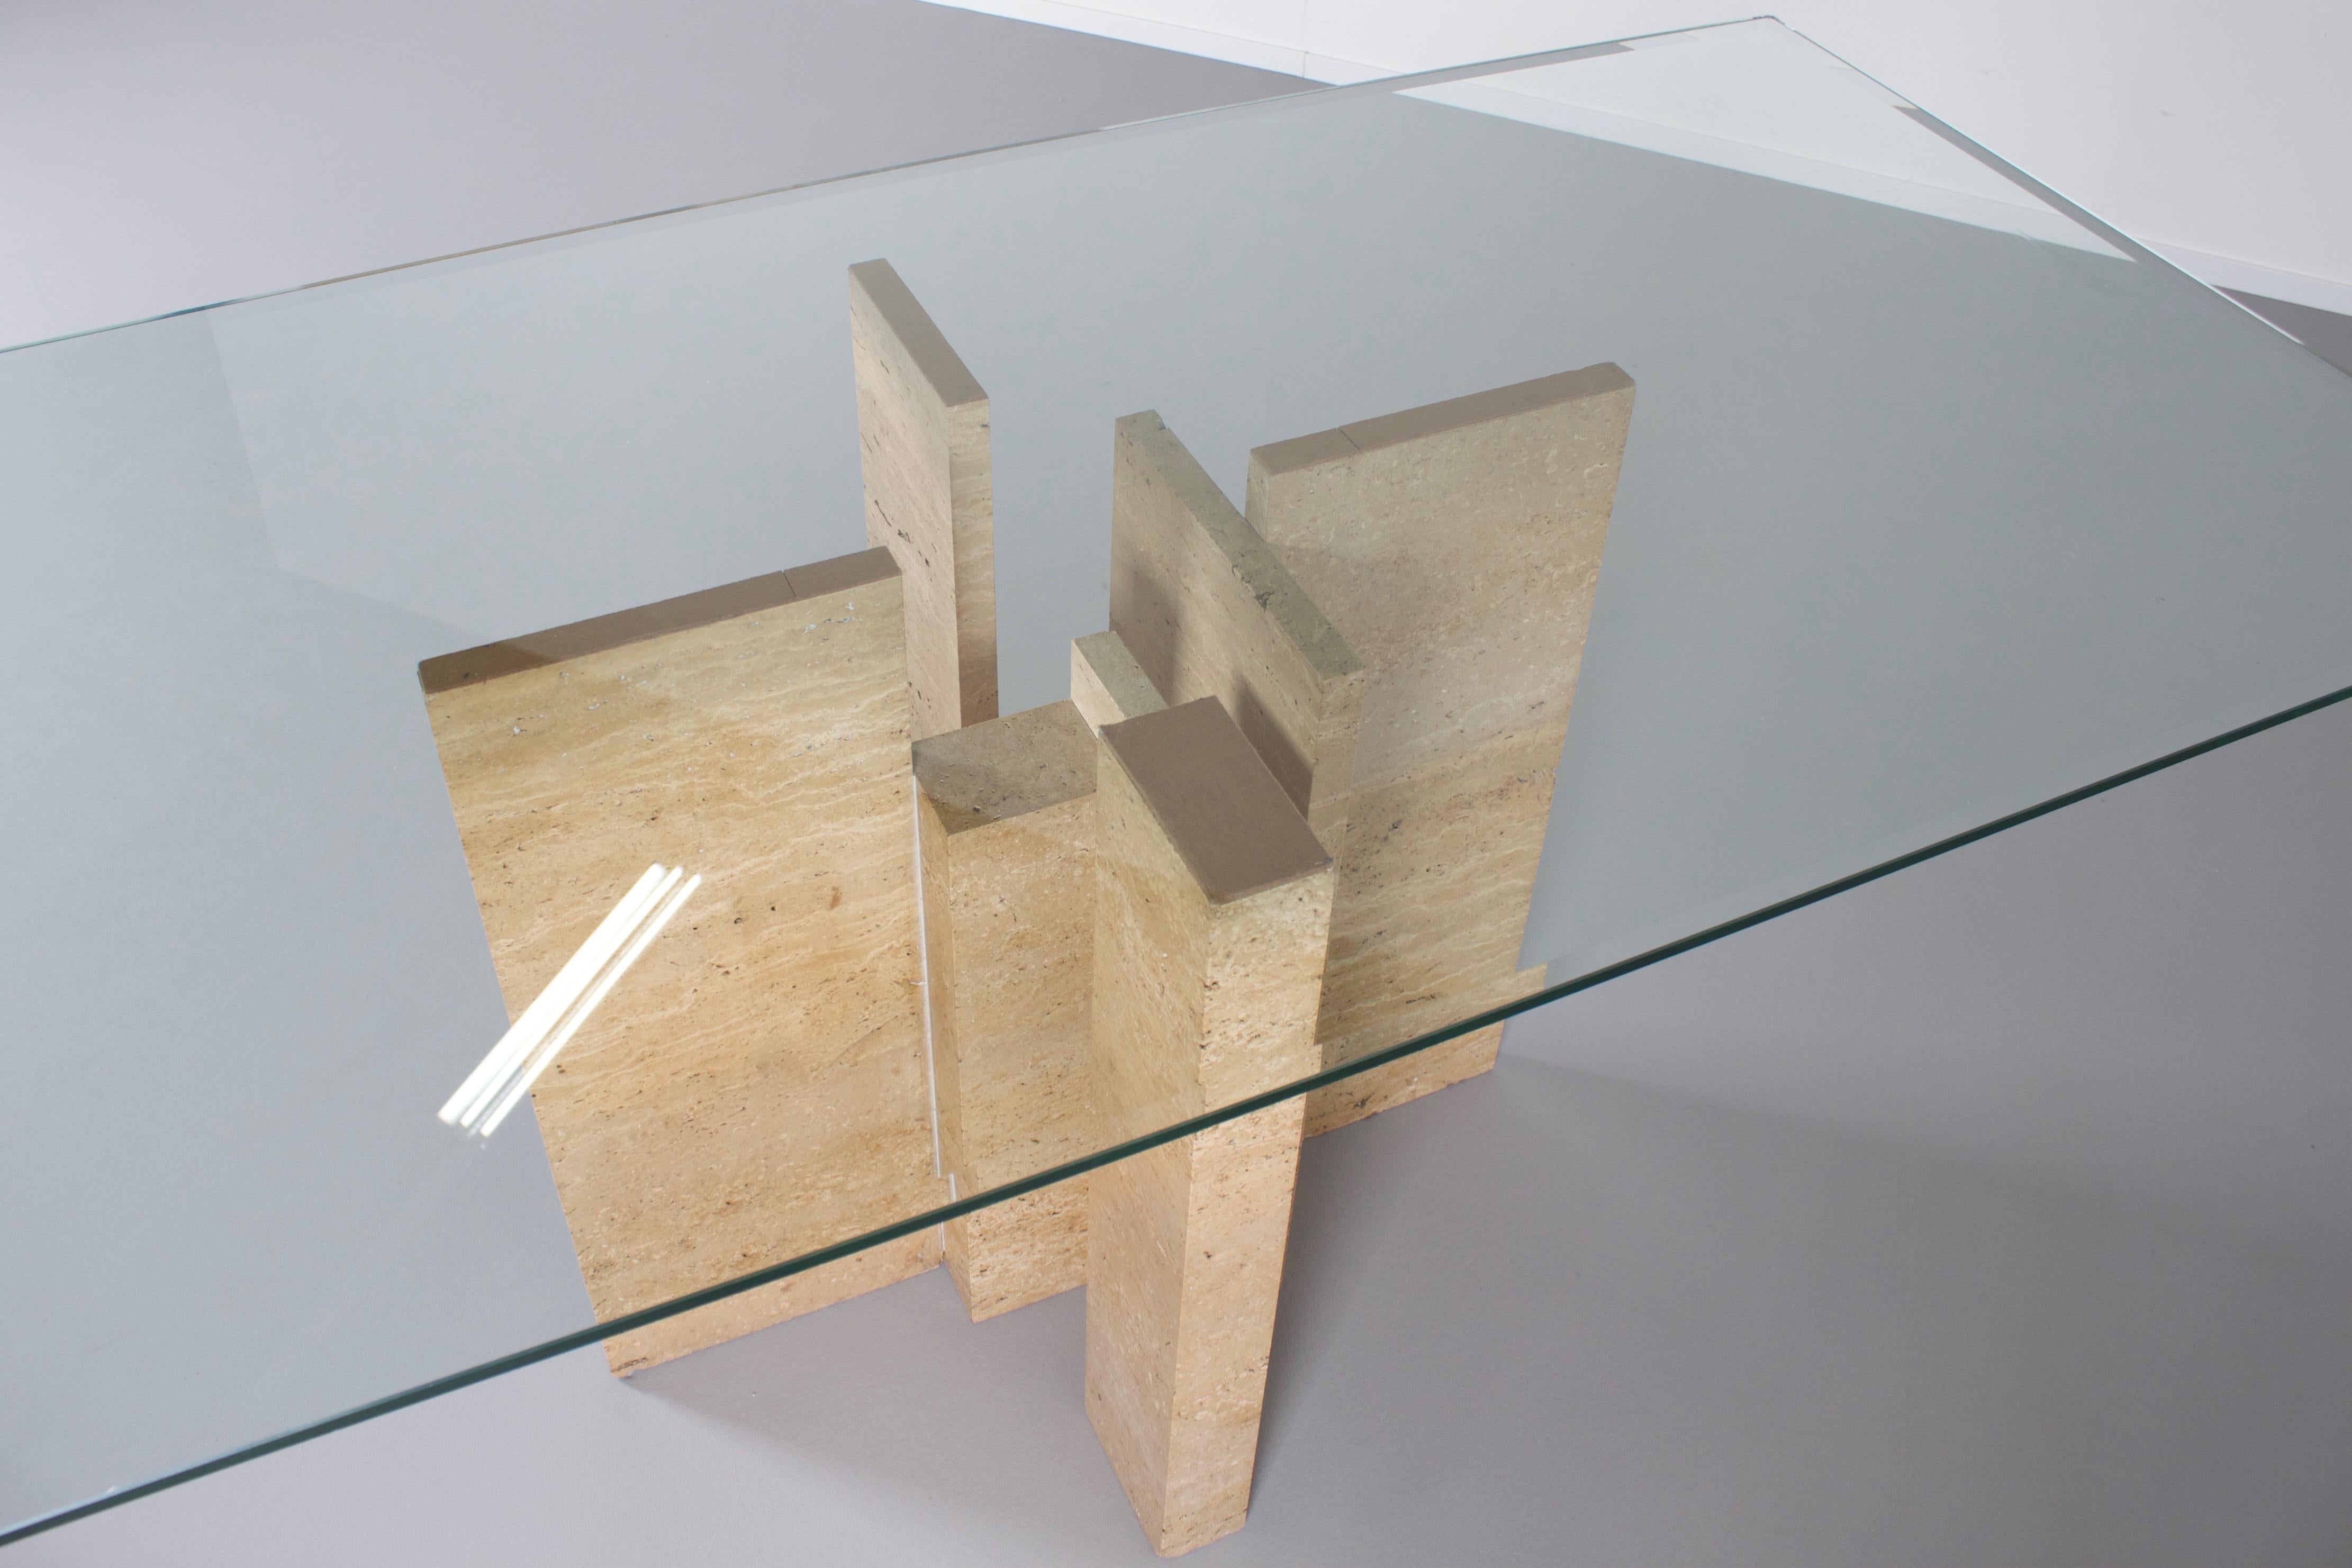 20th Century Sculptural Willy Ballez Dining Table in Travertine and Glass, Belgium 1970s